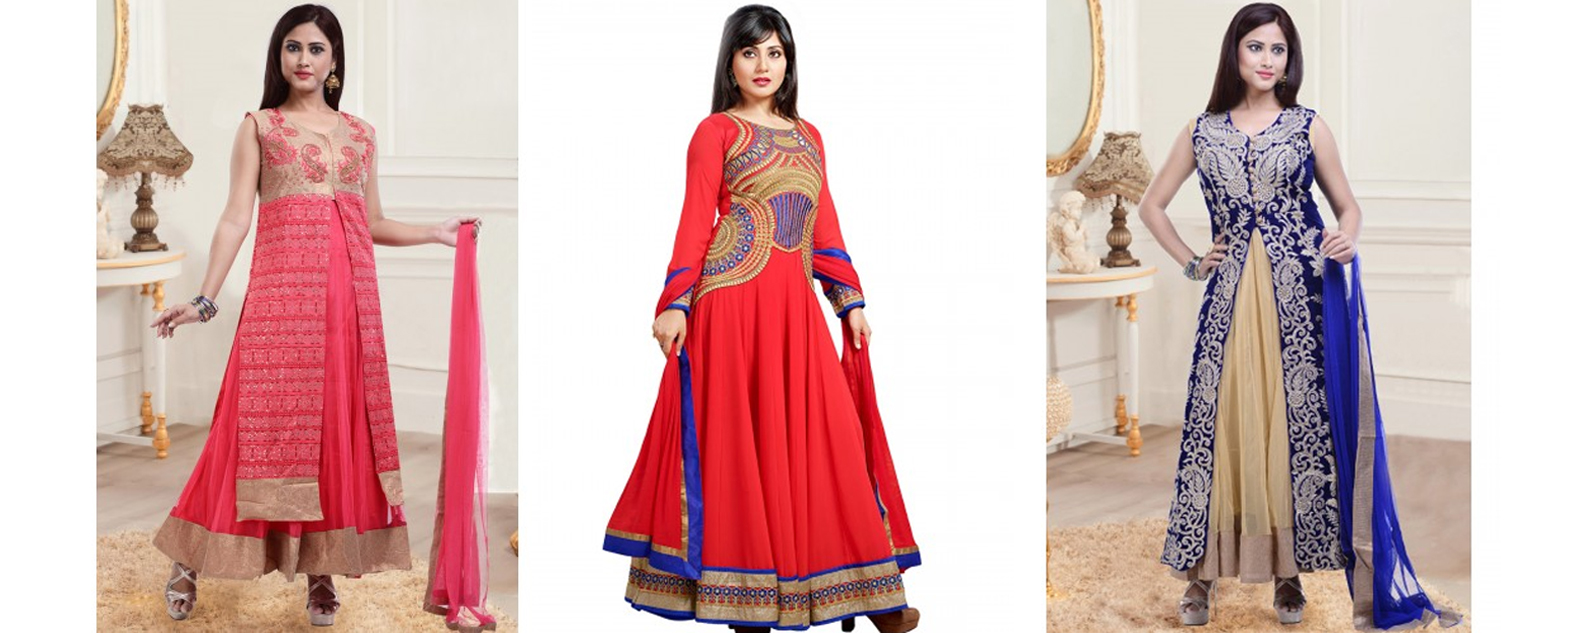 Indian Elegant Outfits For Wedding